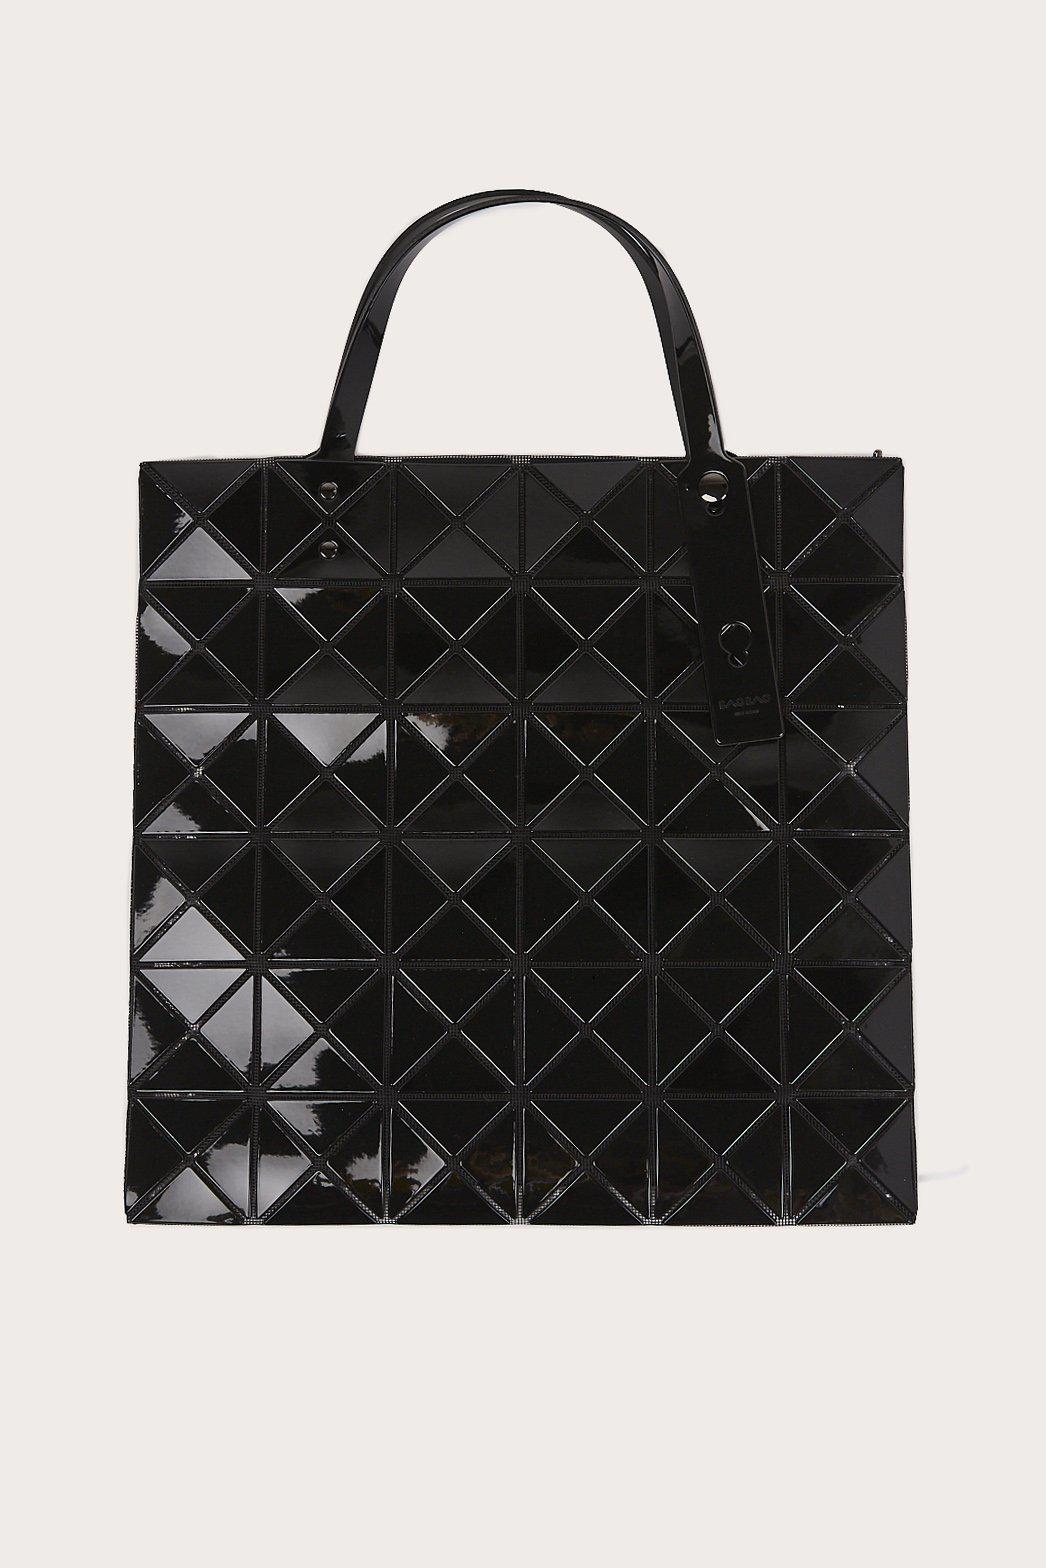 Lyst - Bao Bao Issey Miyake Lucent Basic Tote in Black